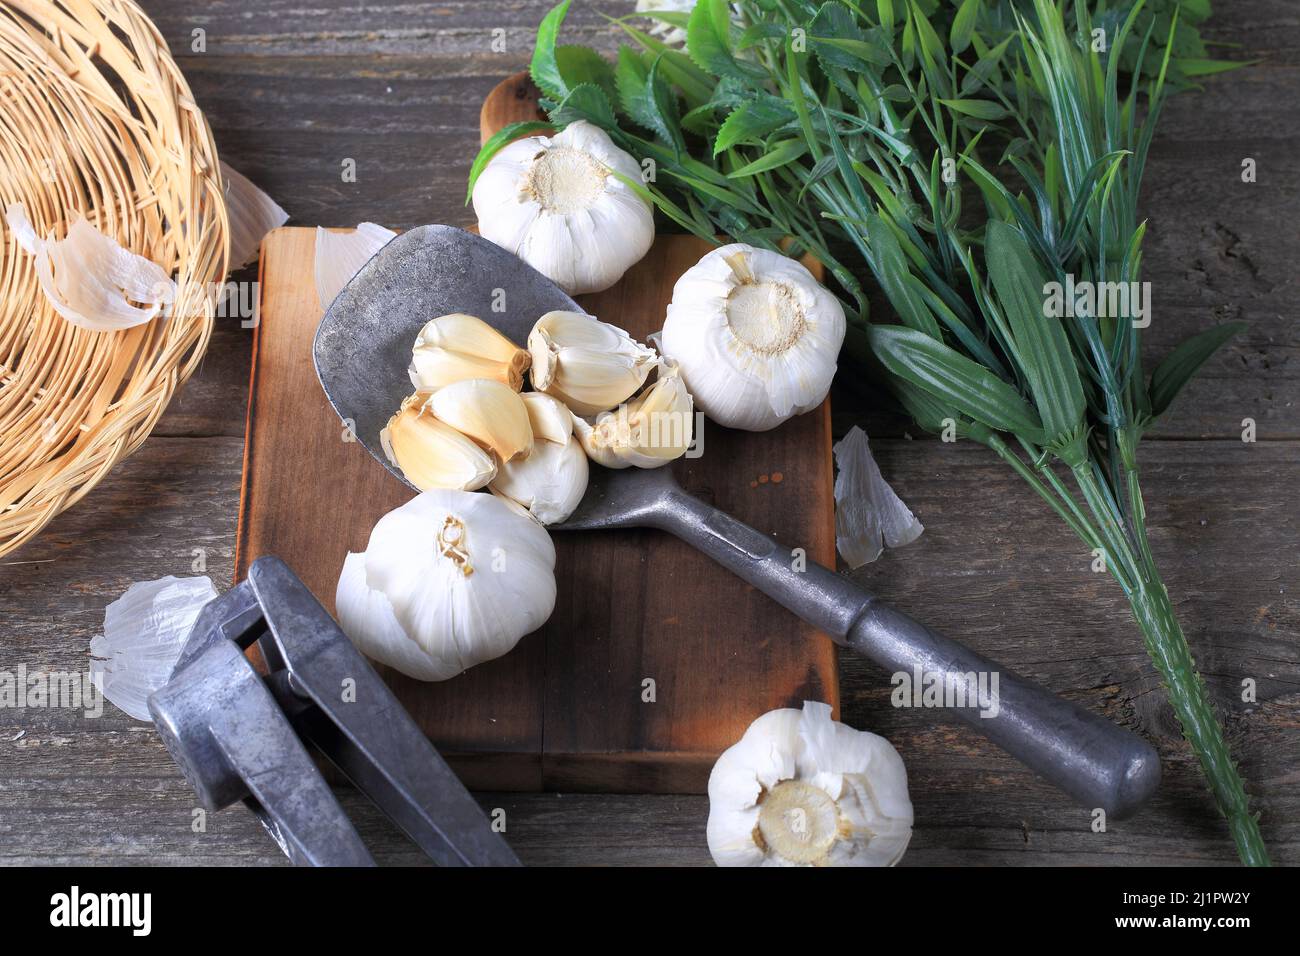 Garlic Cloves and Bulb on Wooden Background Stock Photo